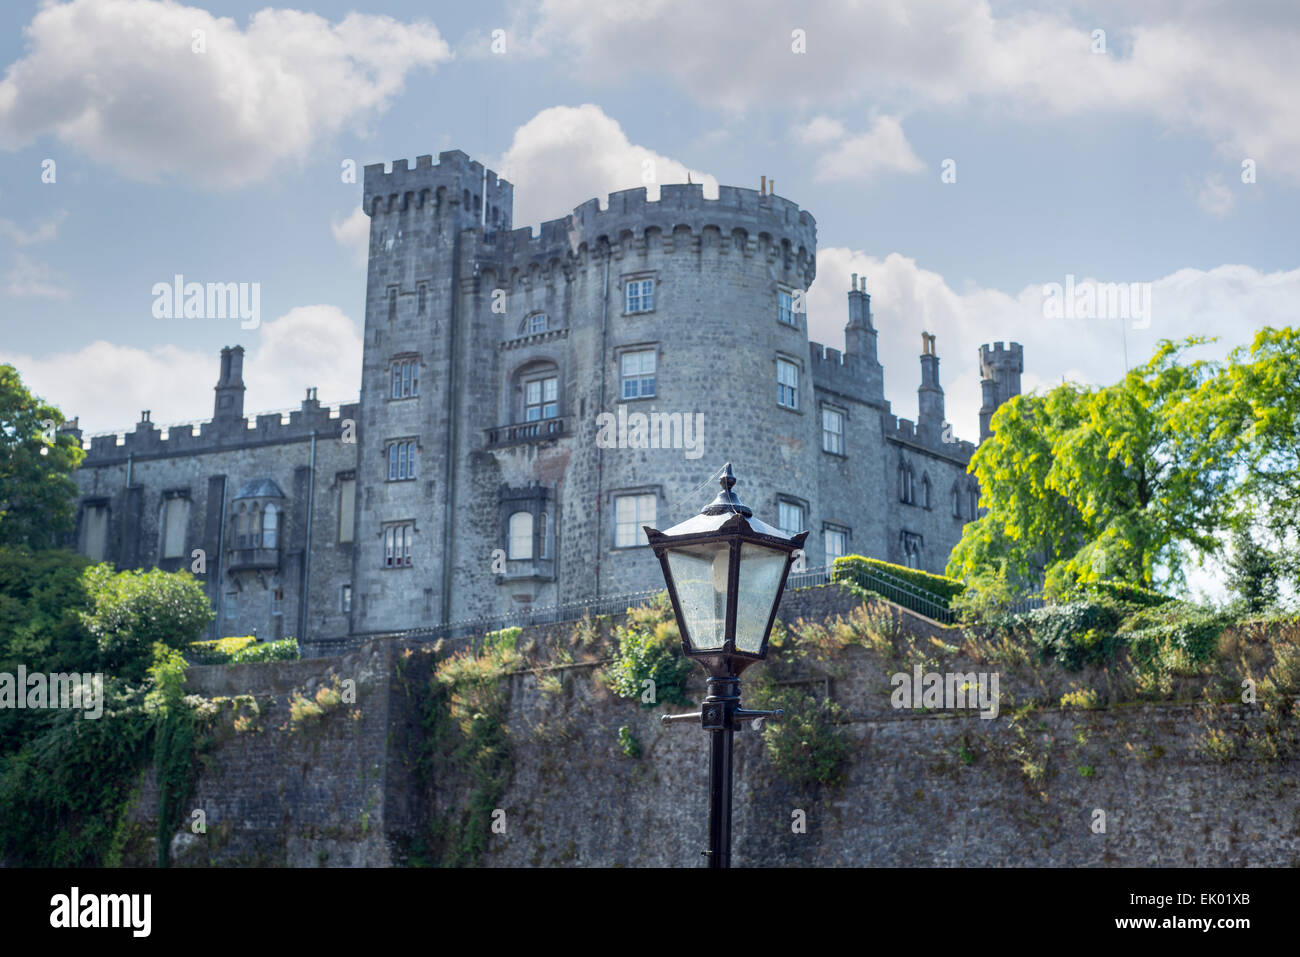 beautiful antique street lamp and riverside view of kilkenny castle in ireland Stock Photo